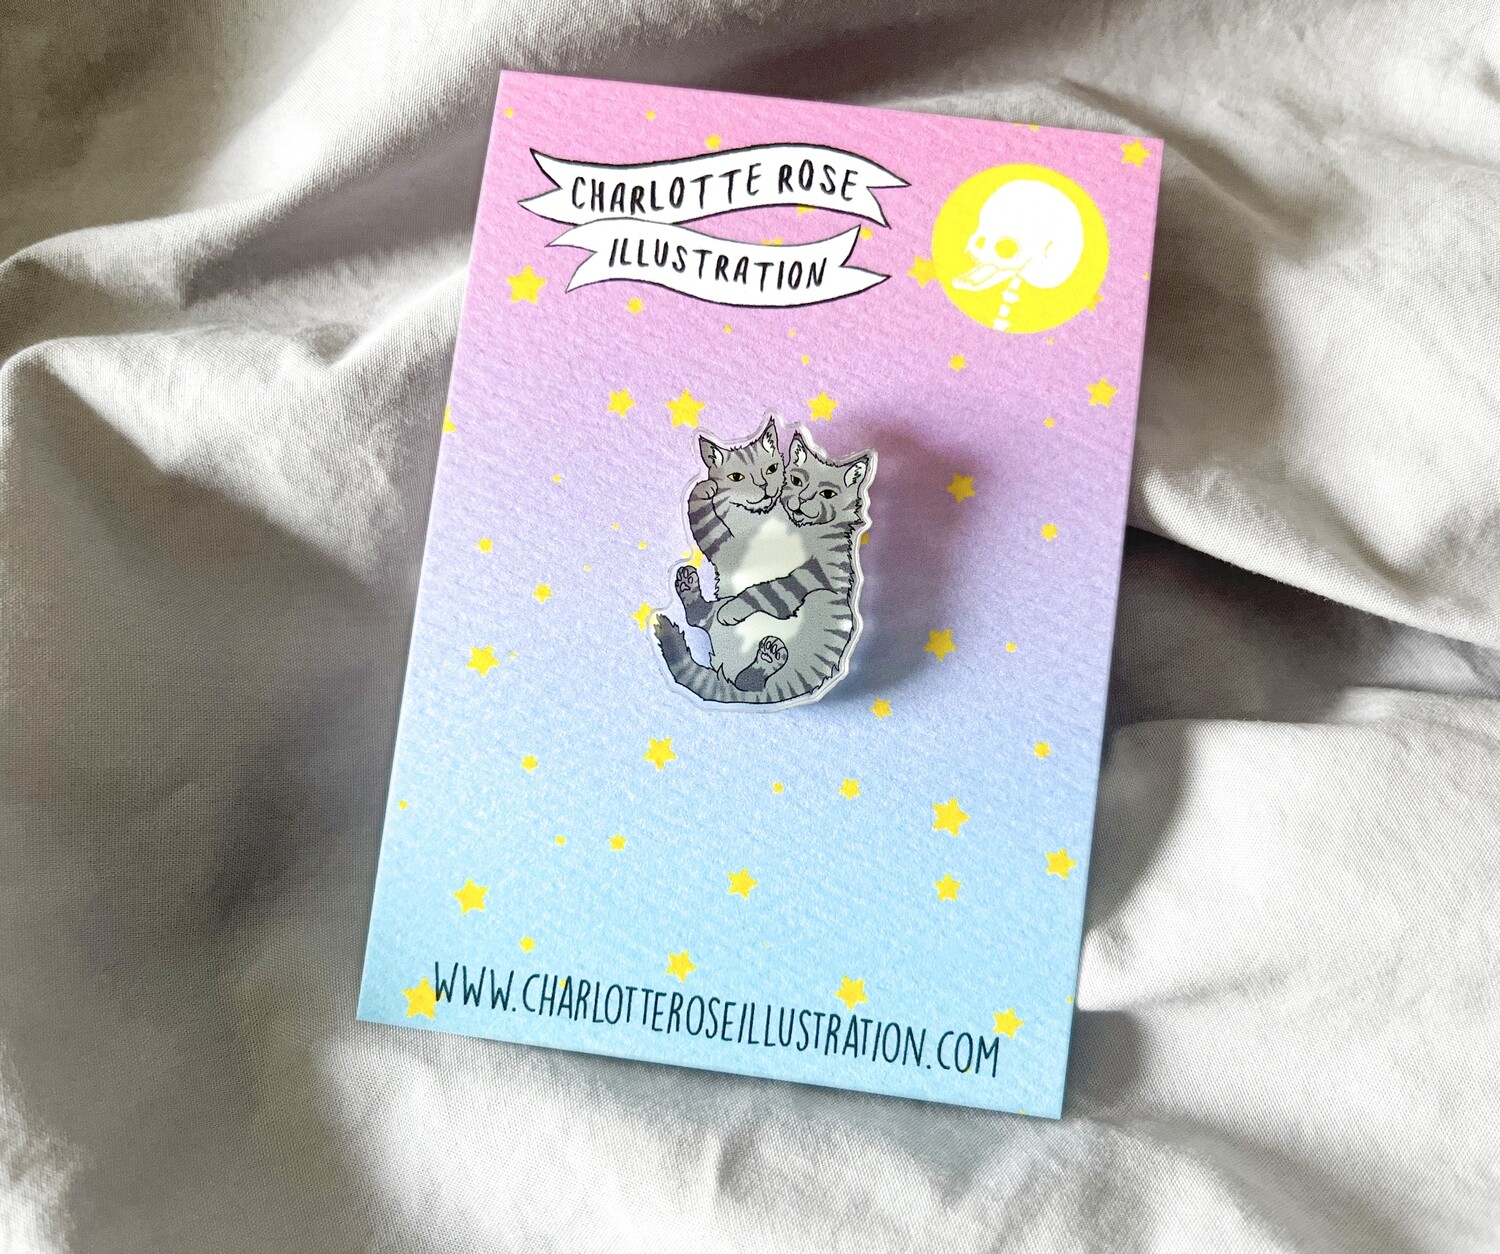 Two Headed Cat pin